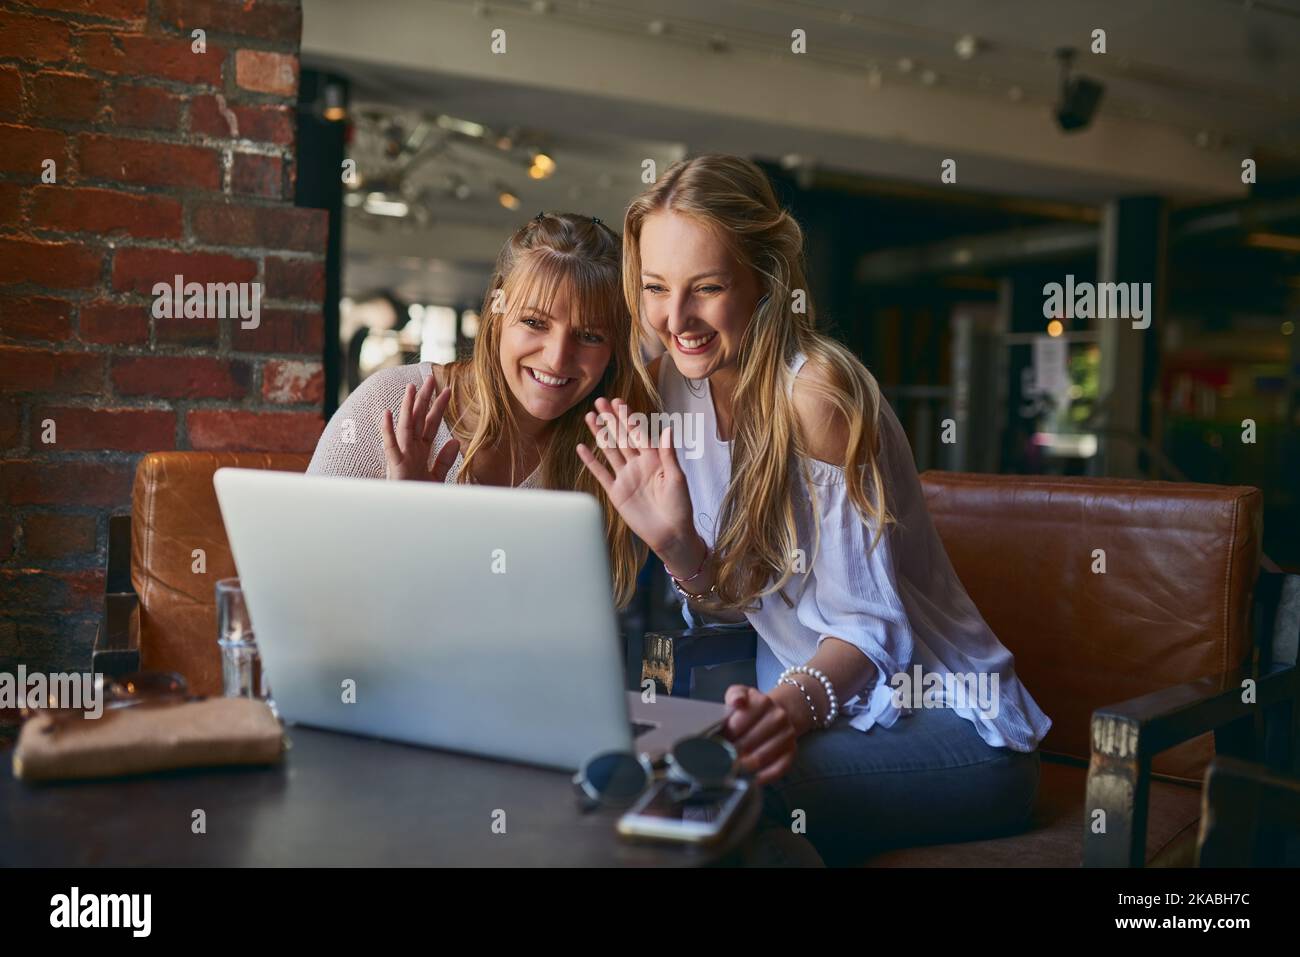 Can you see us. two attractive young girlfriends video chatting via laptop while sitting in a cafe. Stock Photo